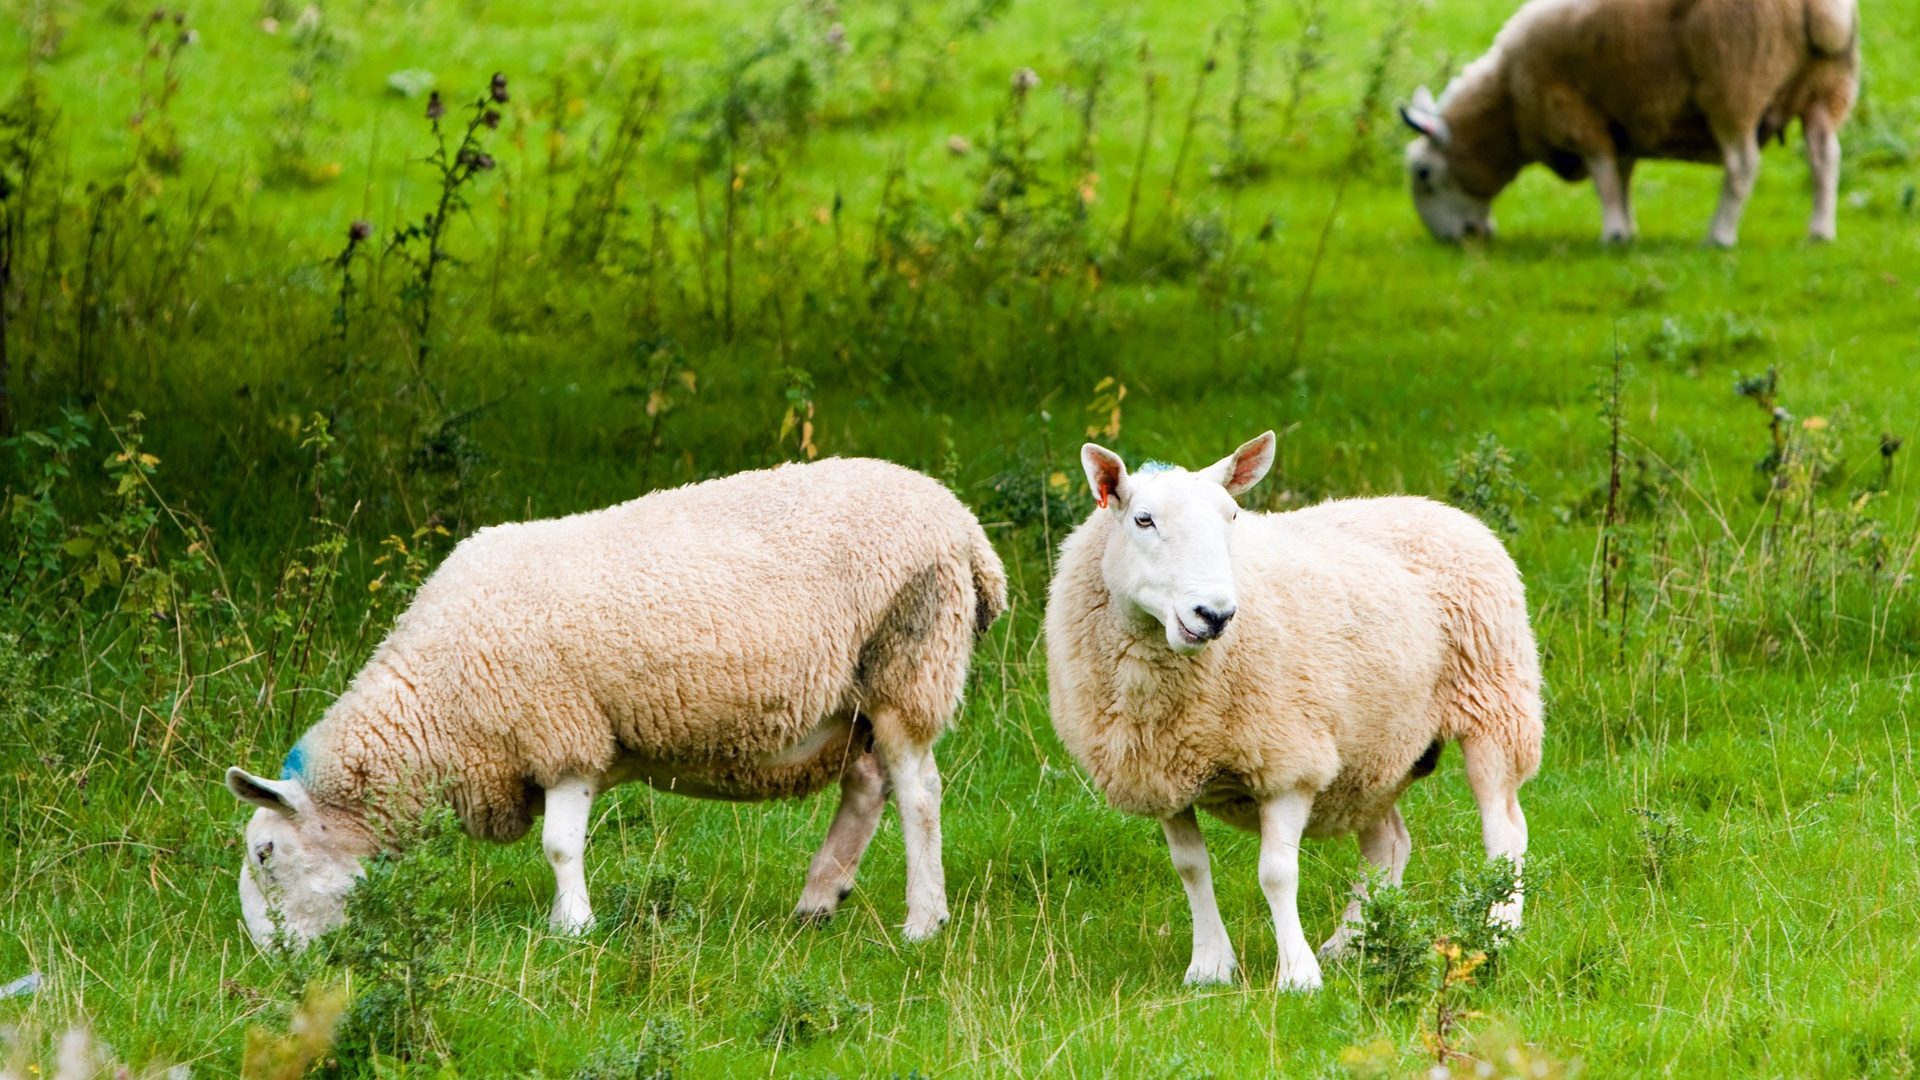 White Sheep on Green Grass Field During Daytime. Wallpaper in 1920x1080 Resolution